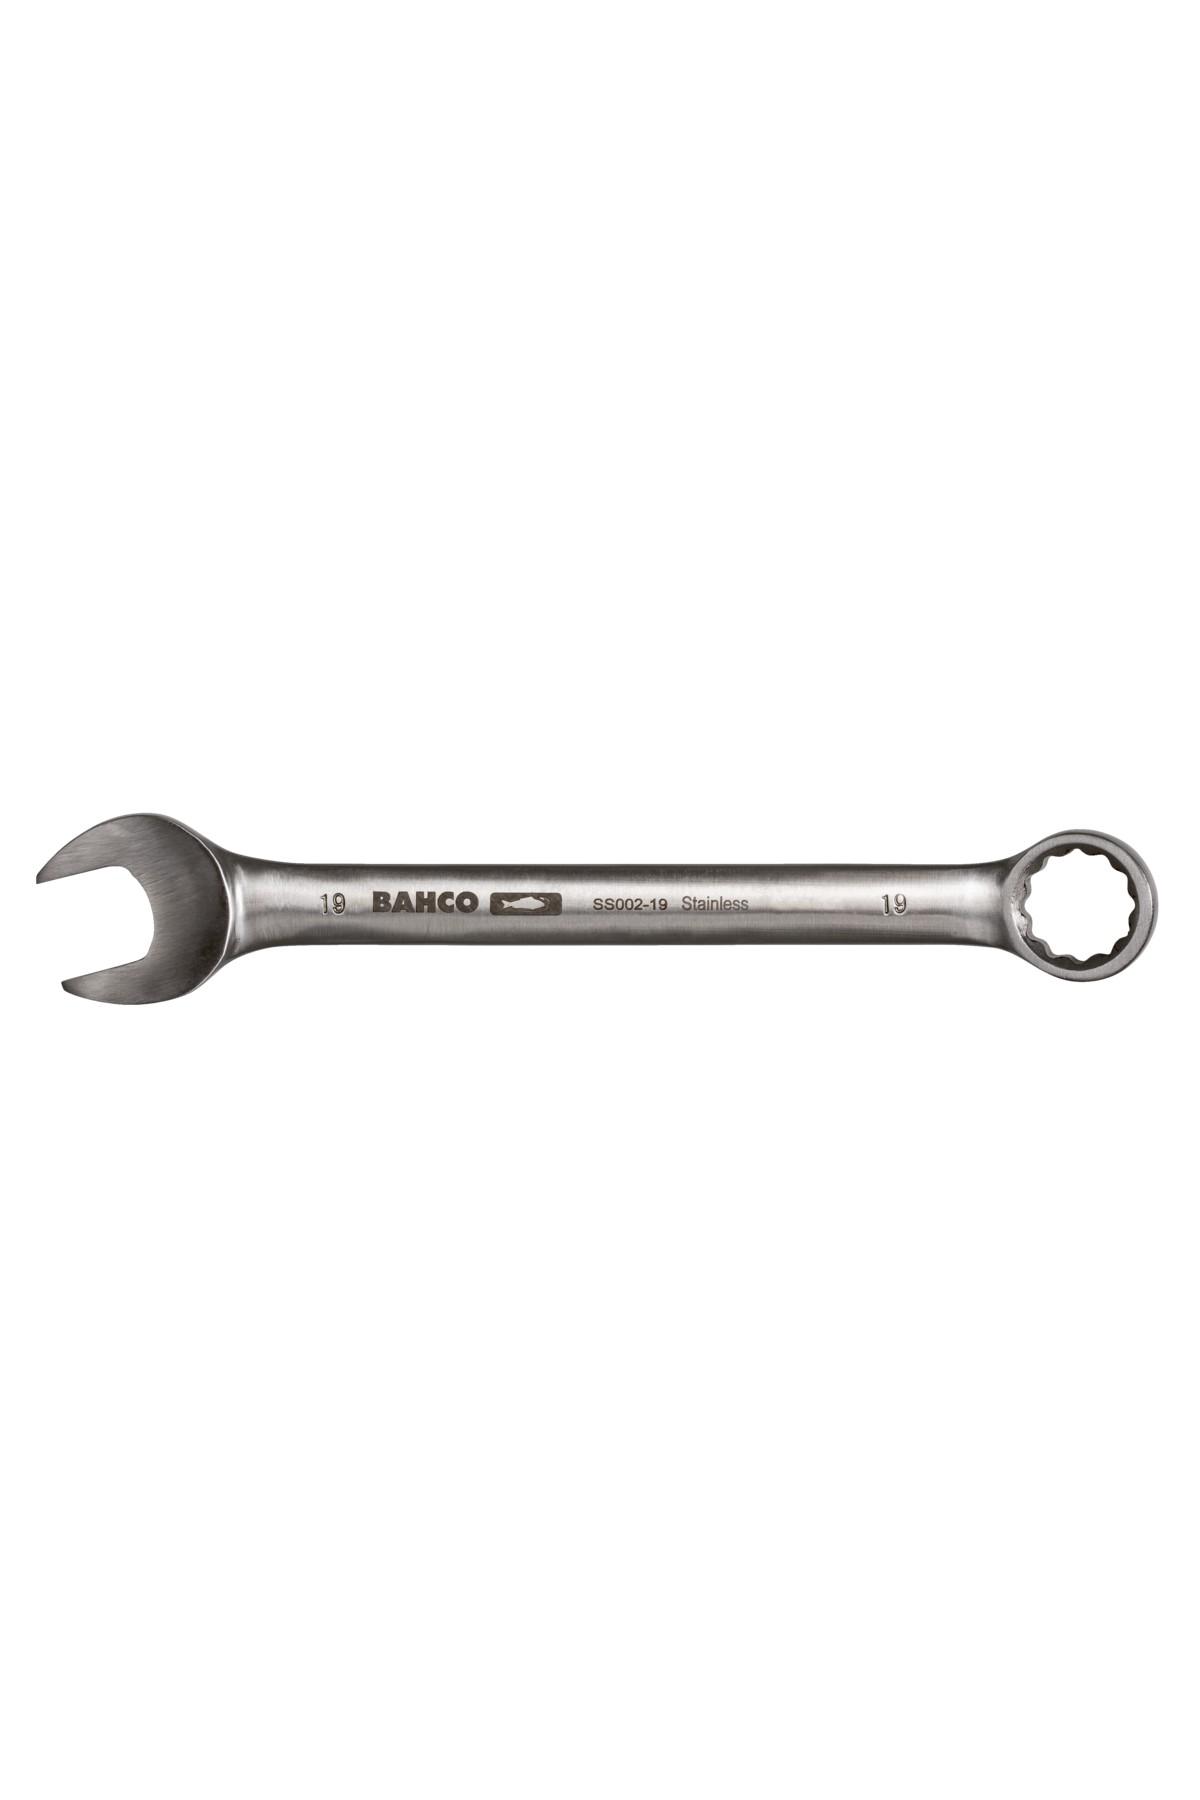 Ring spanner stainless steel SS003 3/4